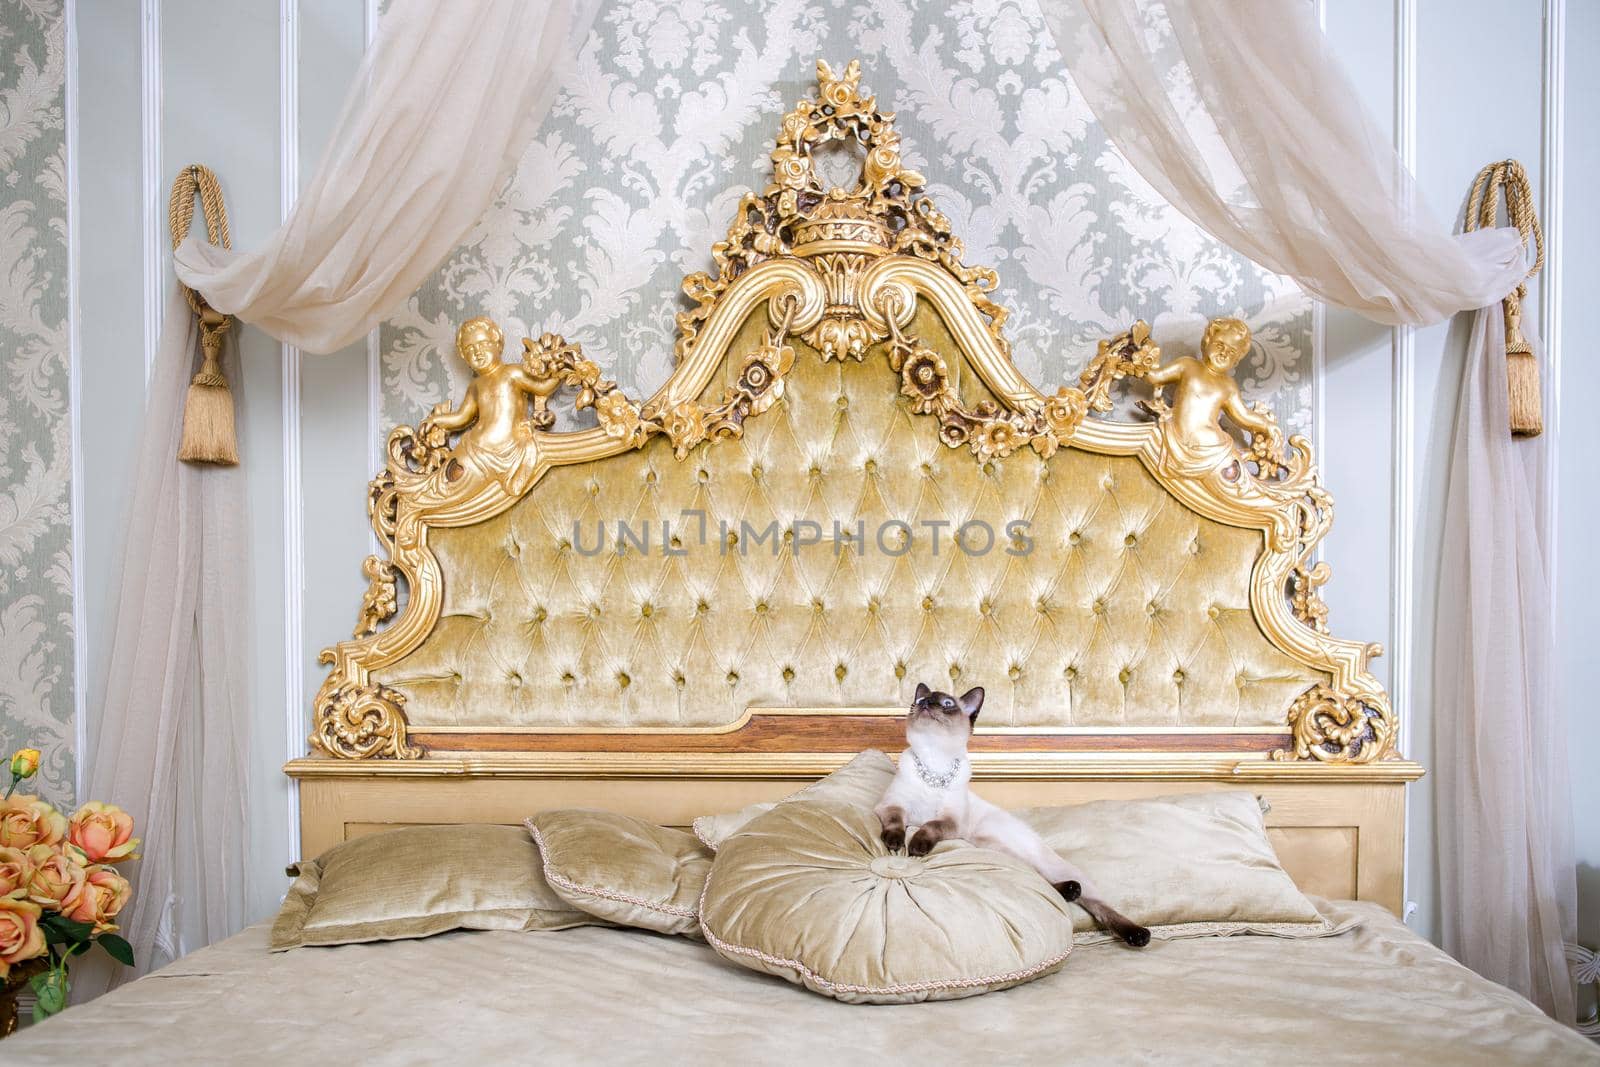 The theme is luxury and wealth. Young cat without a tail thoroughbred Mecogon bobtail lies resting on a big bed on a pillow in a Renaissance Baroque interior in France Europe Versailles Palace.